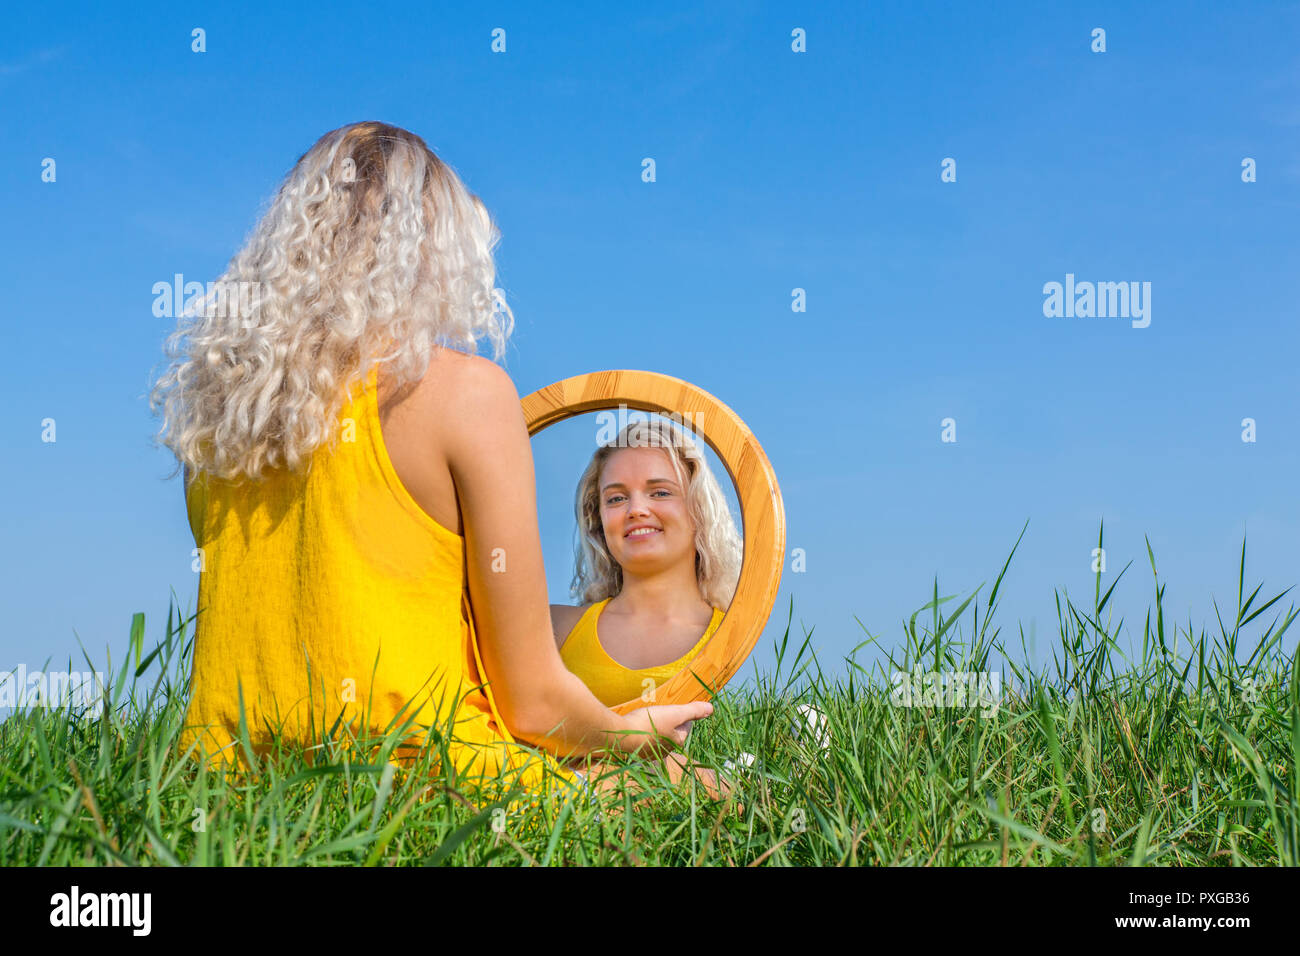 Blond woman sits looking at her mirror image outside Stock Photo